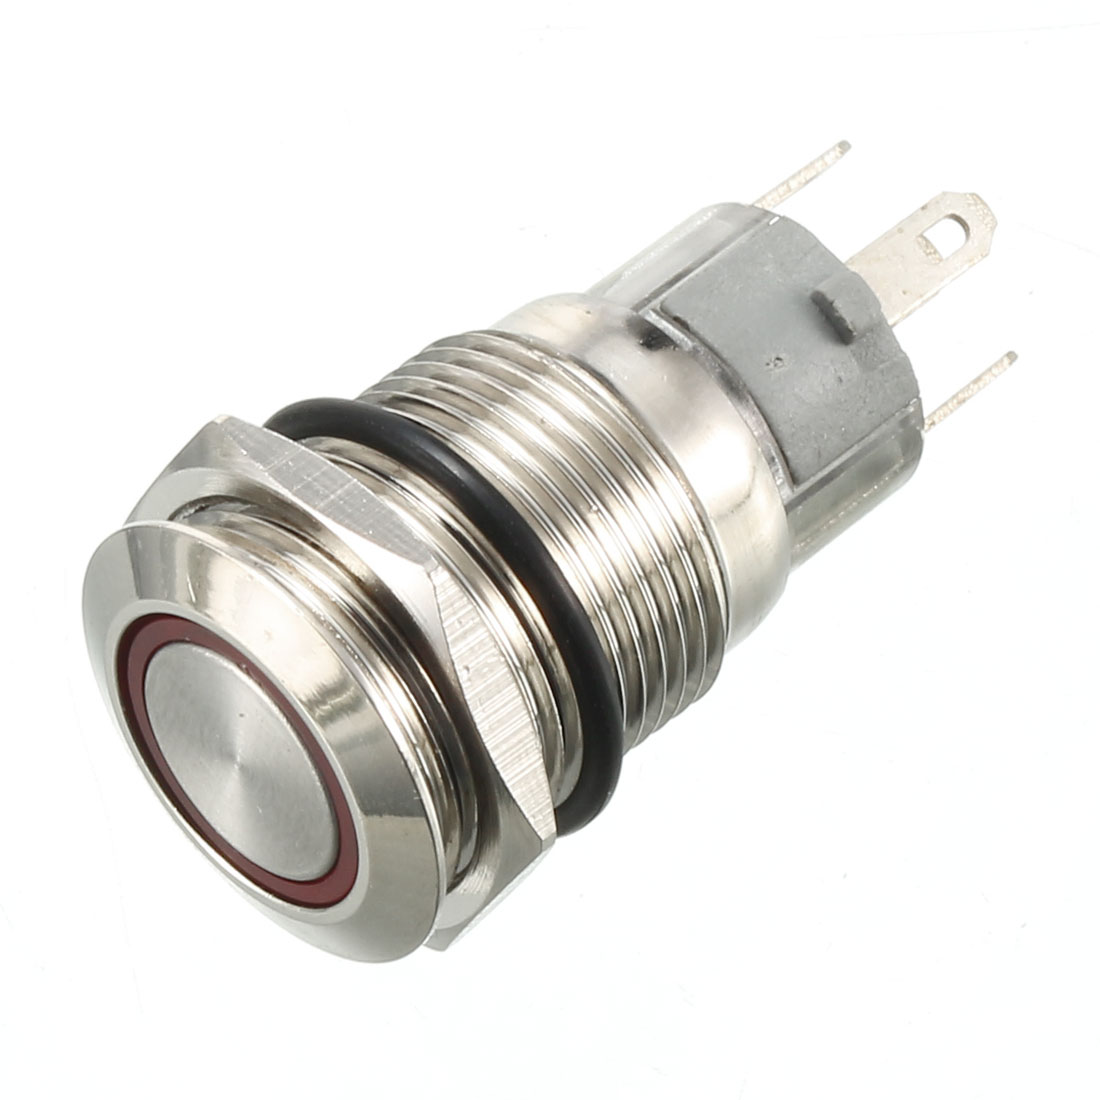 Unique Bargains RED led Light 16mm 12V Stainless Steel Switch Momentary Push Button 5 Pin SPDT